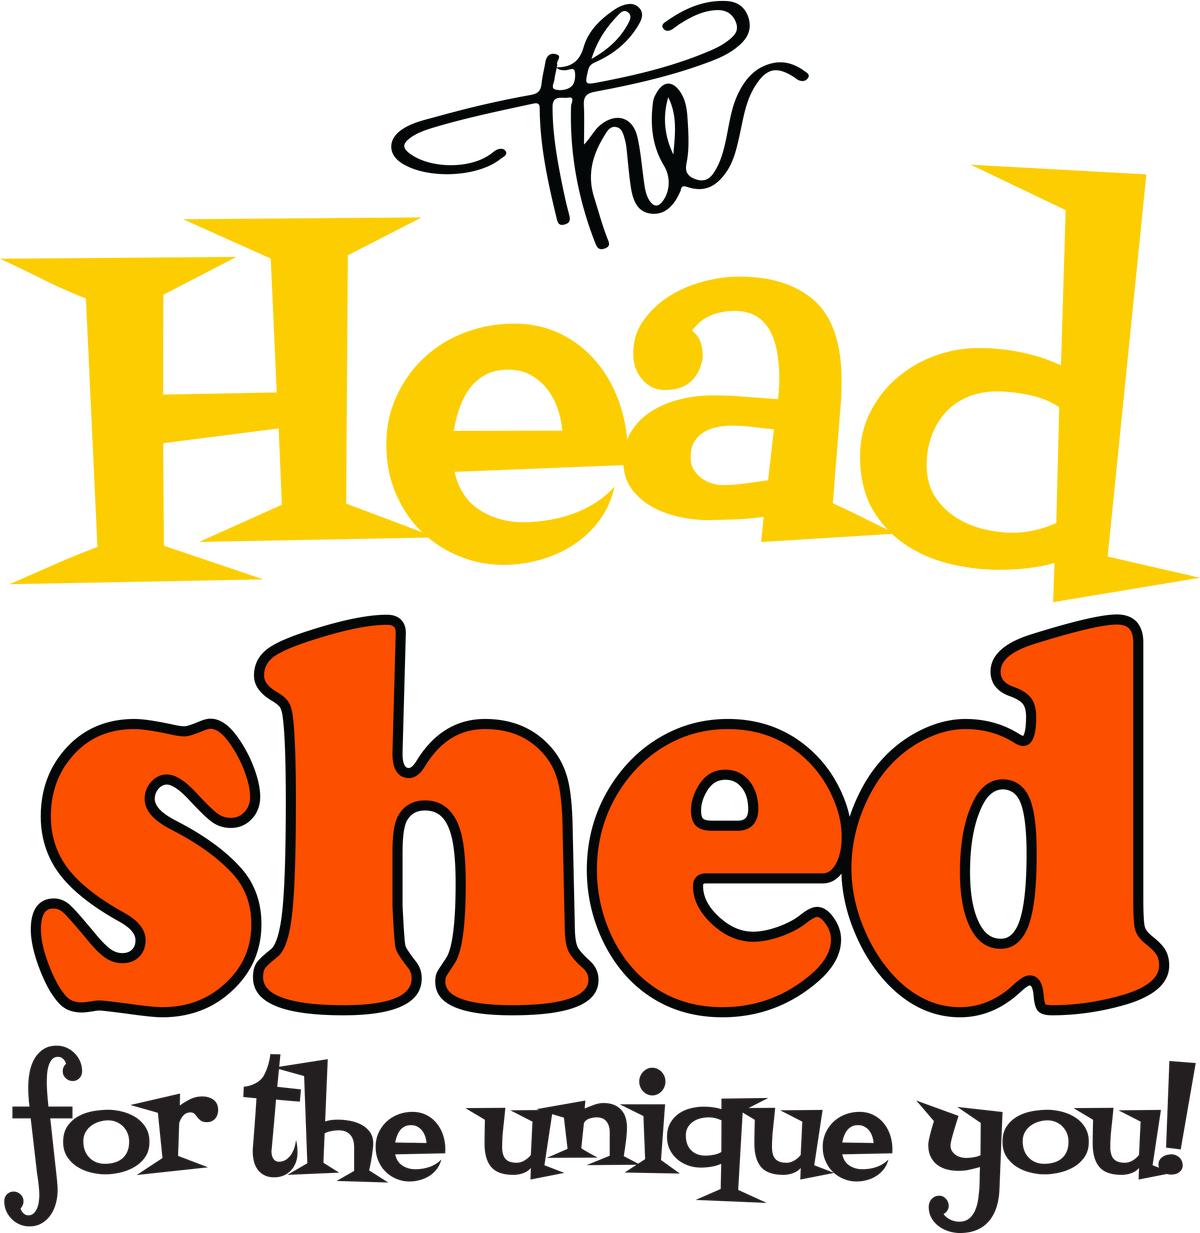 The Head Shed